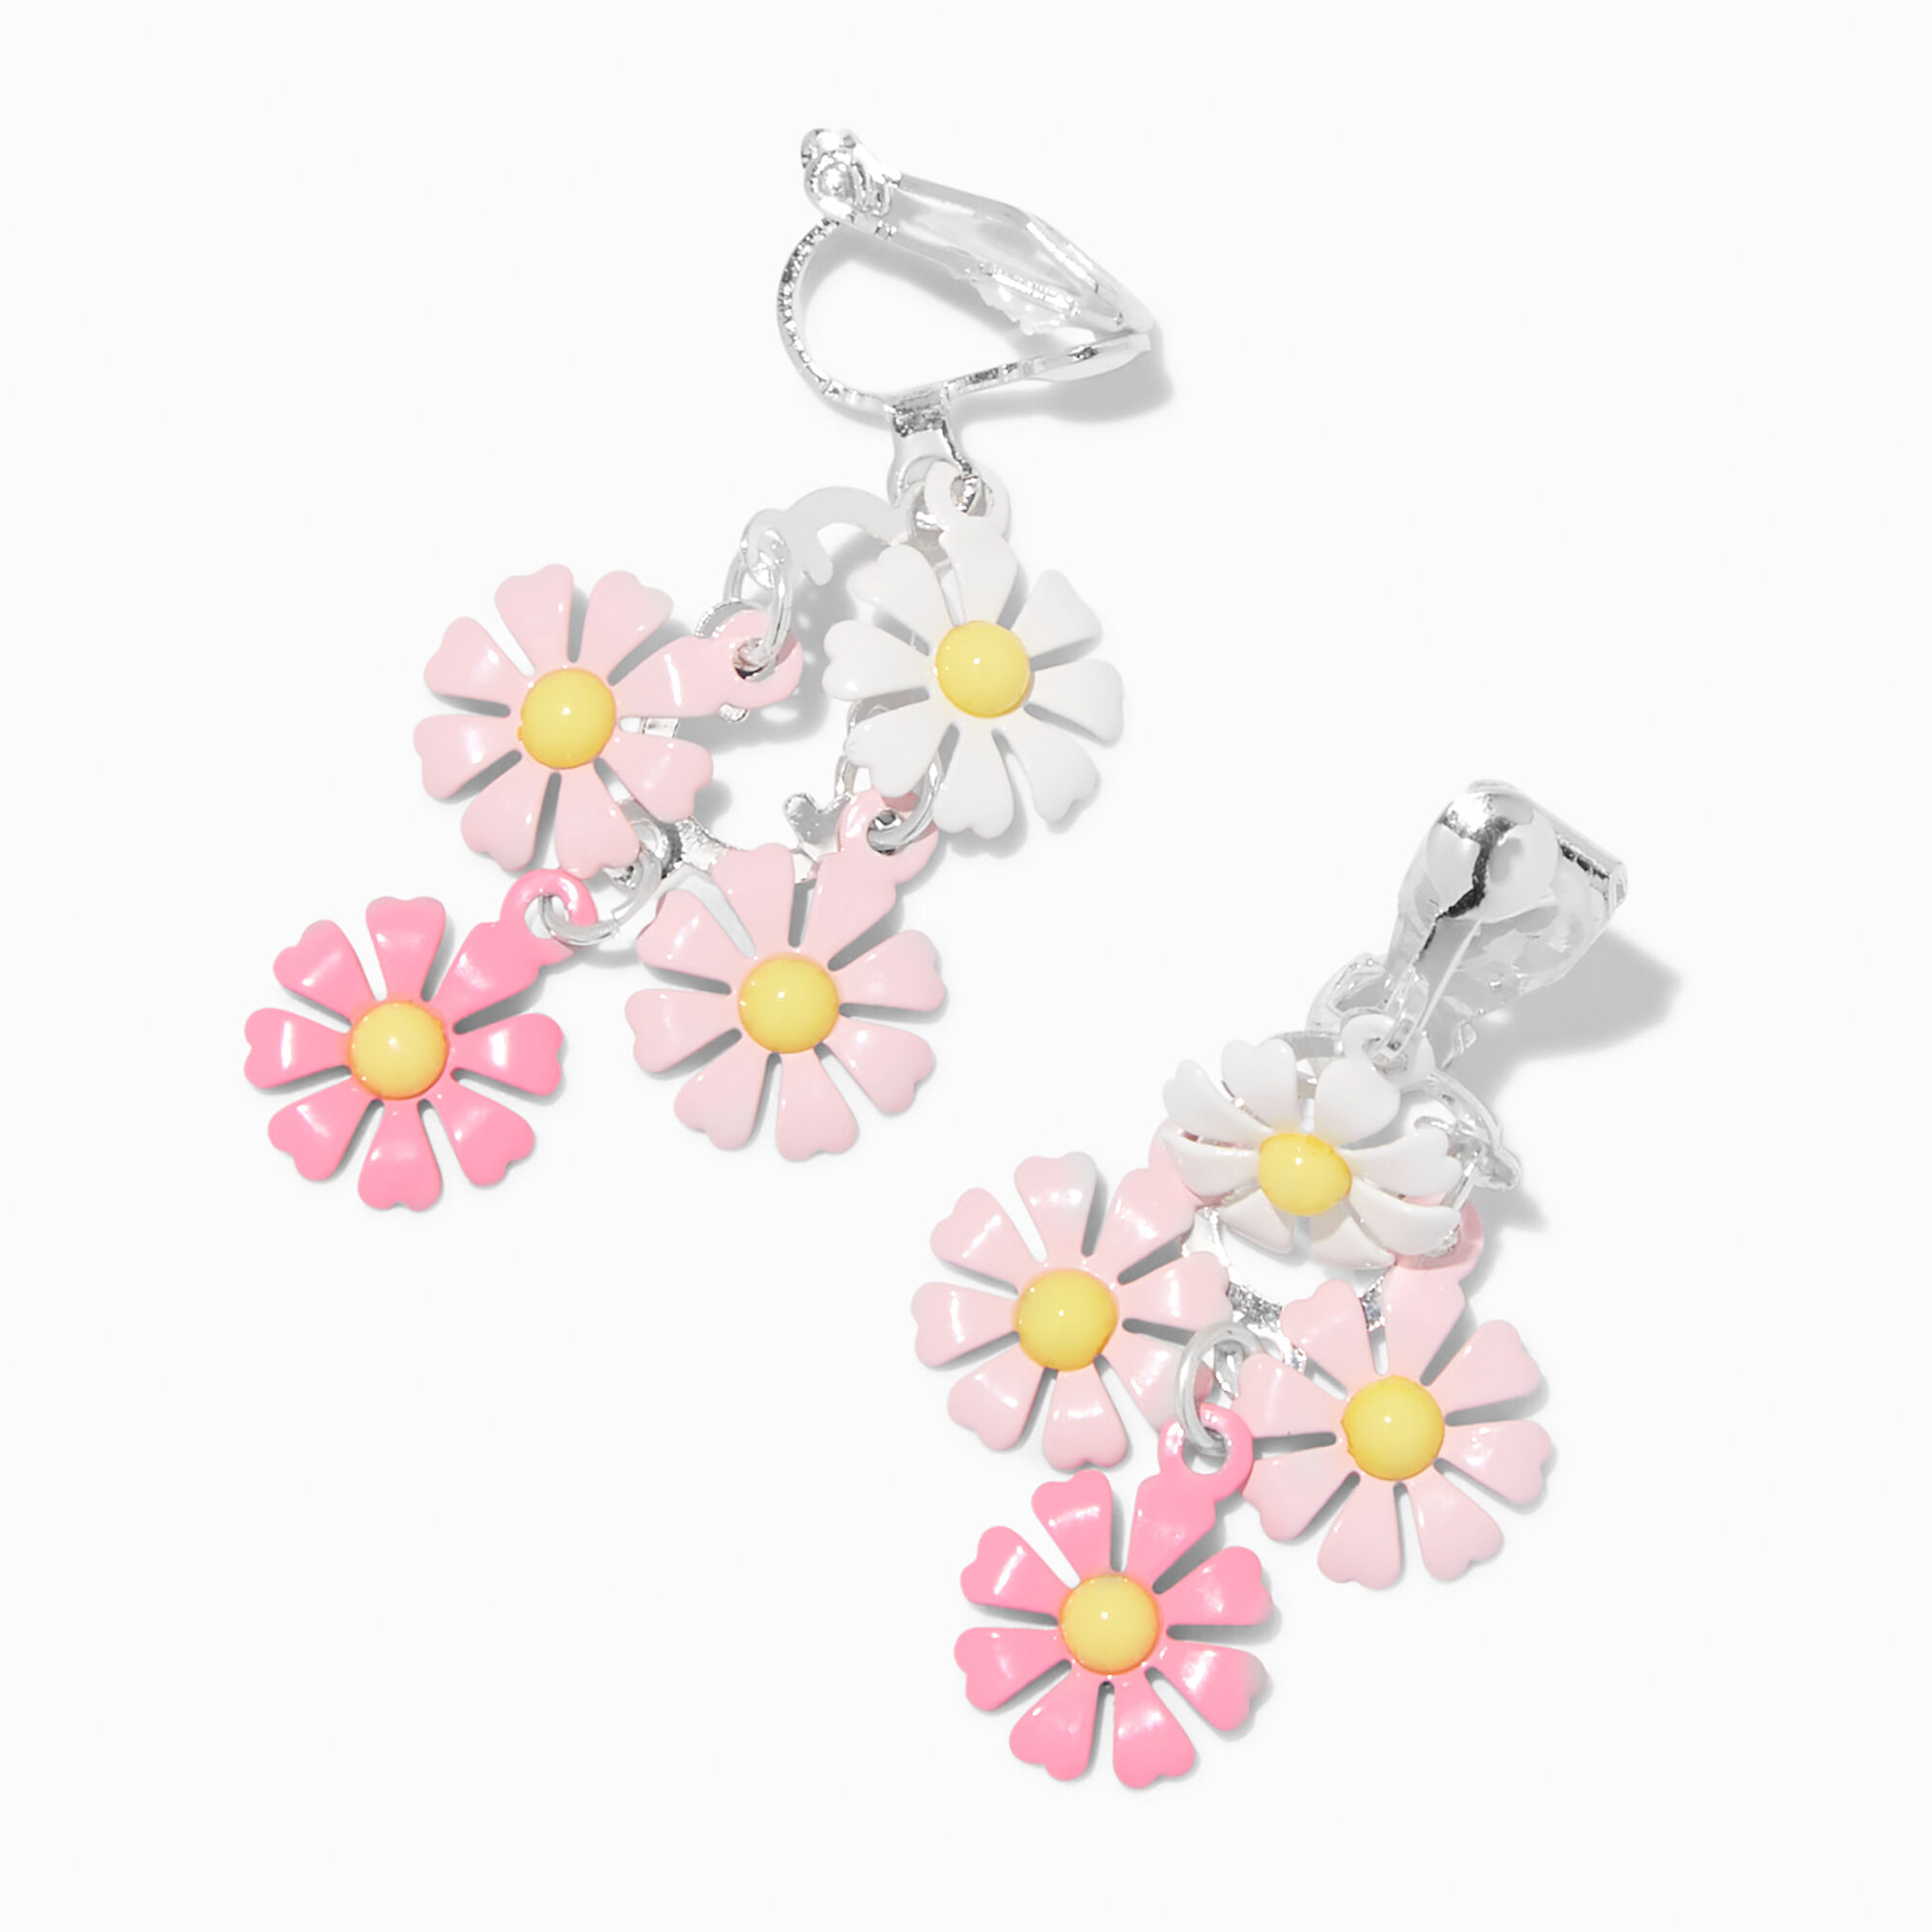 View Claires 15 Daisy ClipOn Drop Earrings Pink information